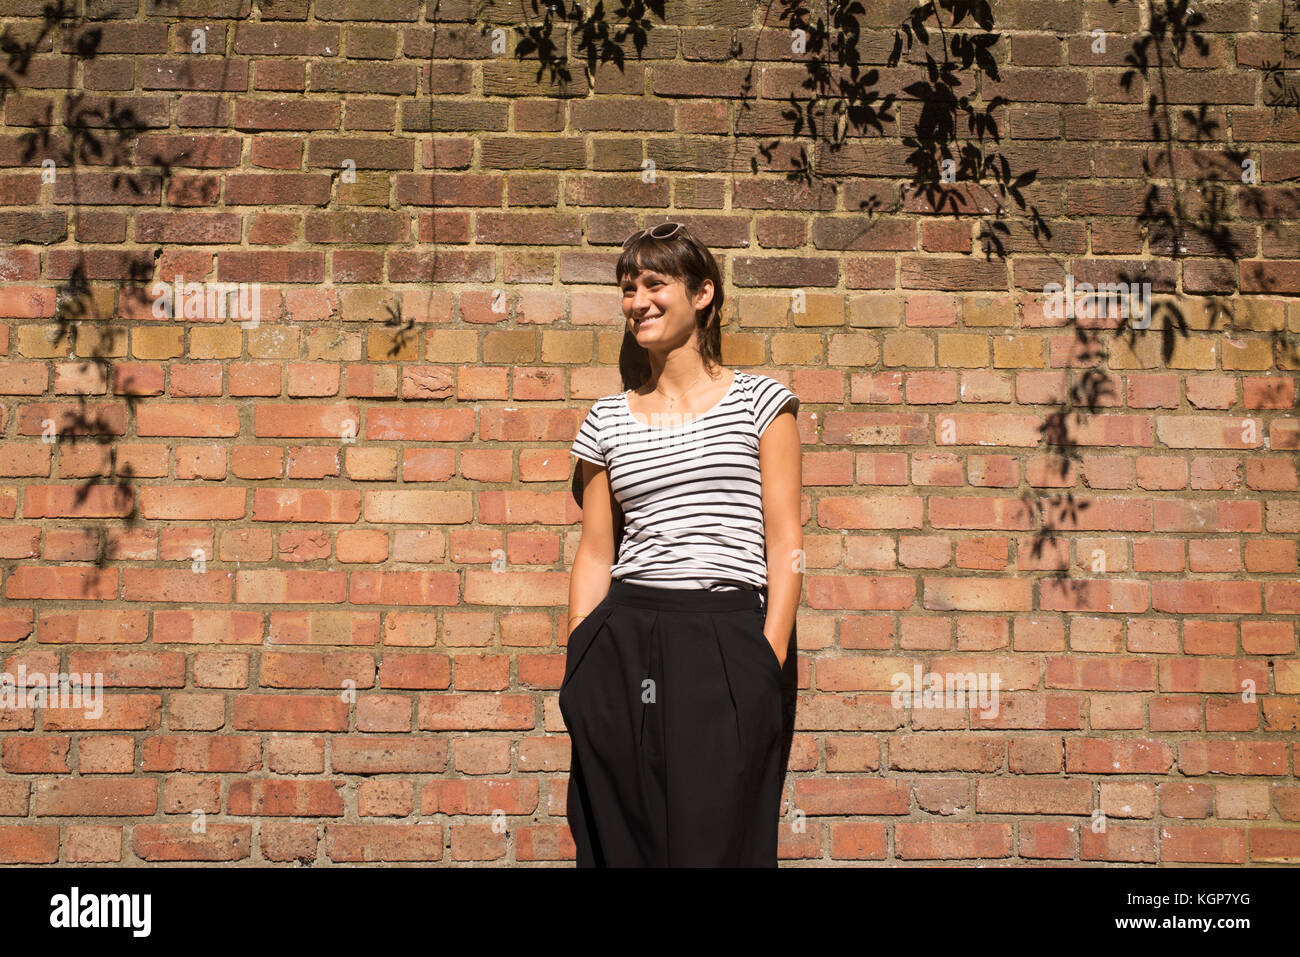 Young Woman dressed in urban minimal style with black and white striped T-shirt and black trousers. Brick wall as background Stock Photo